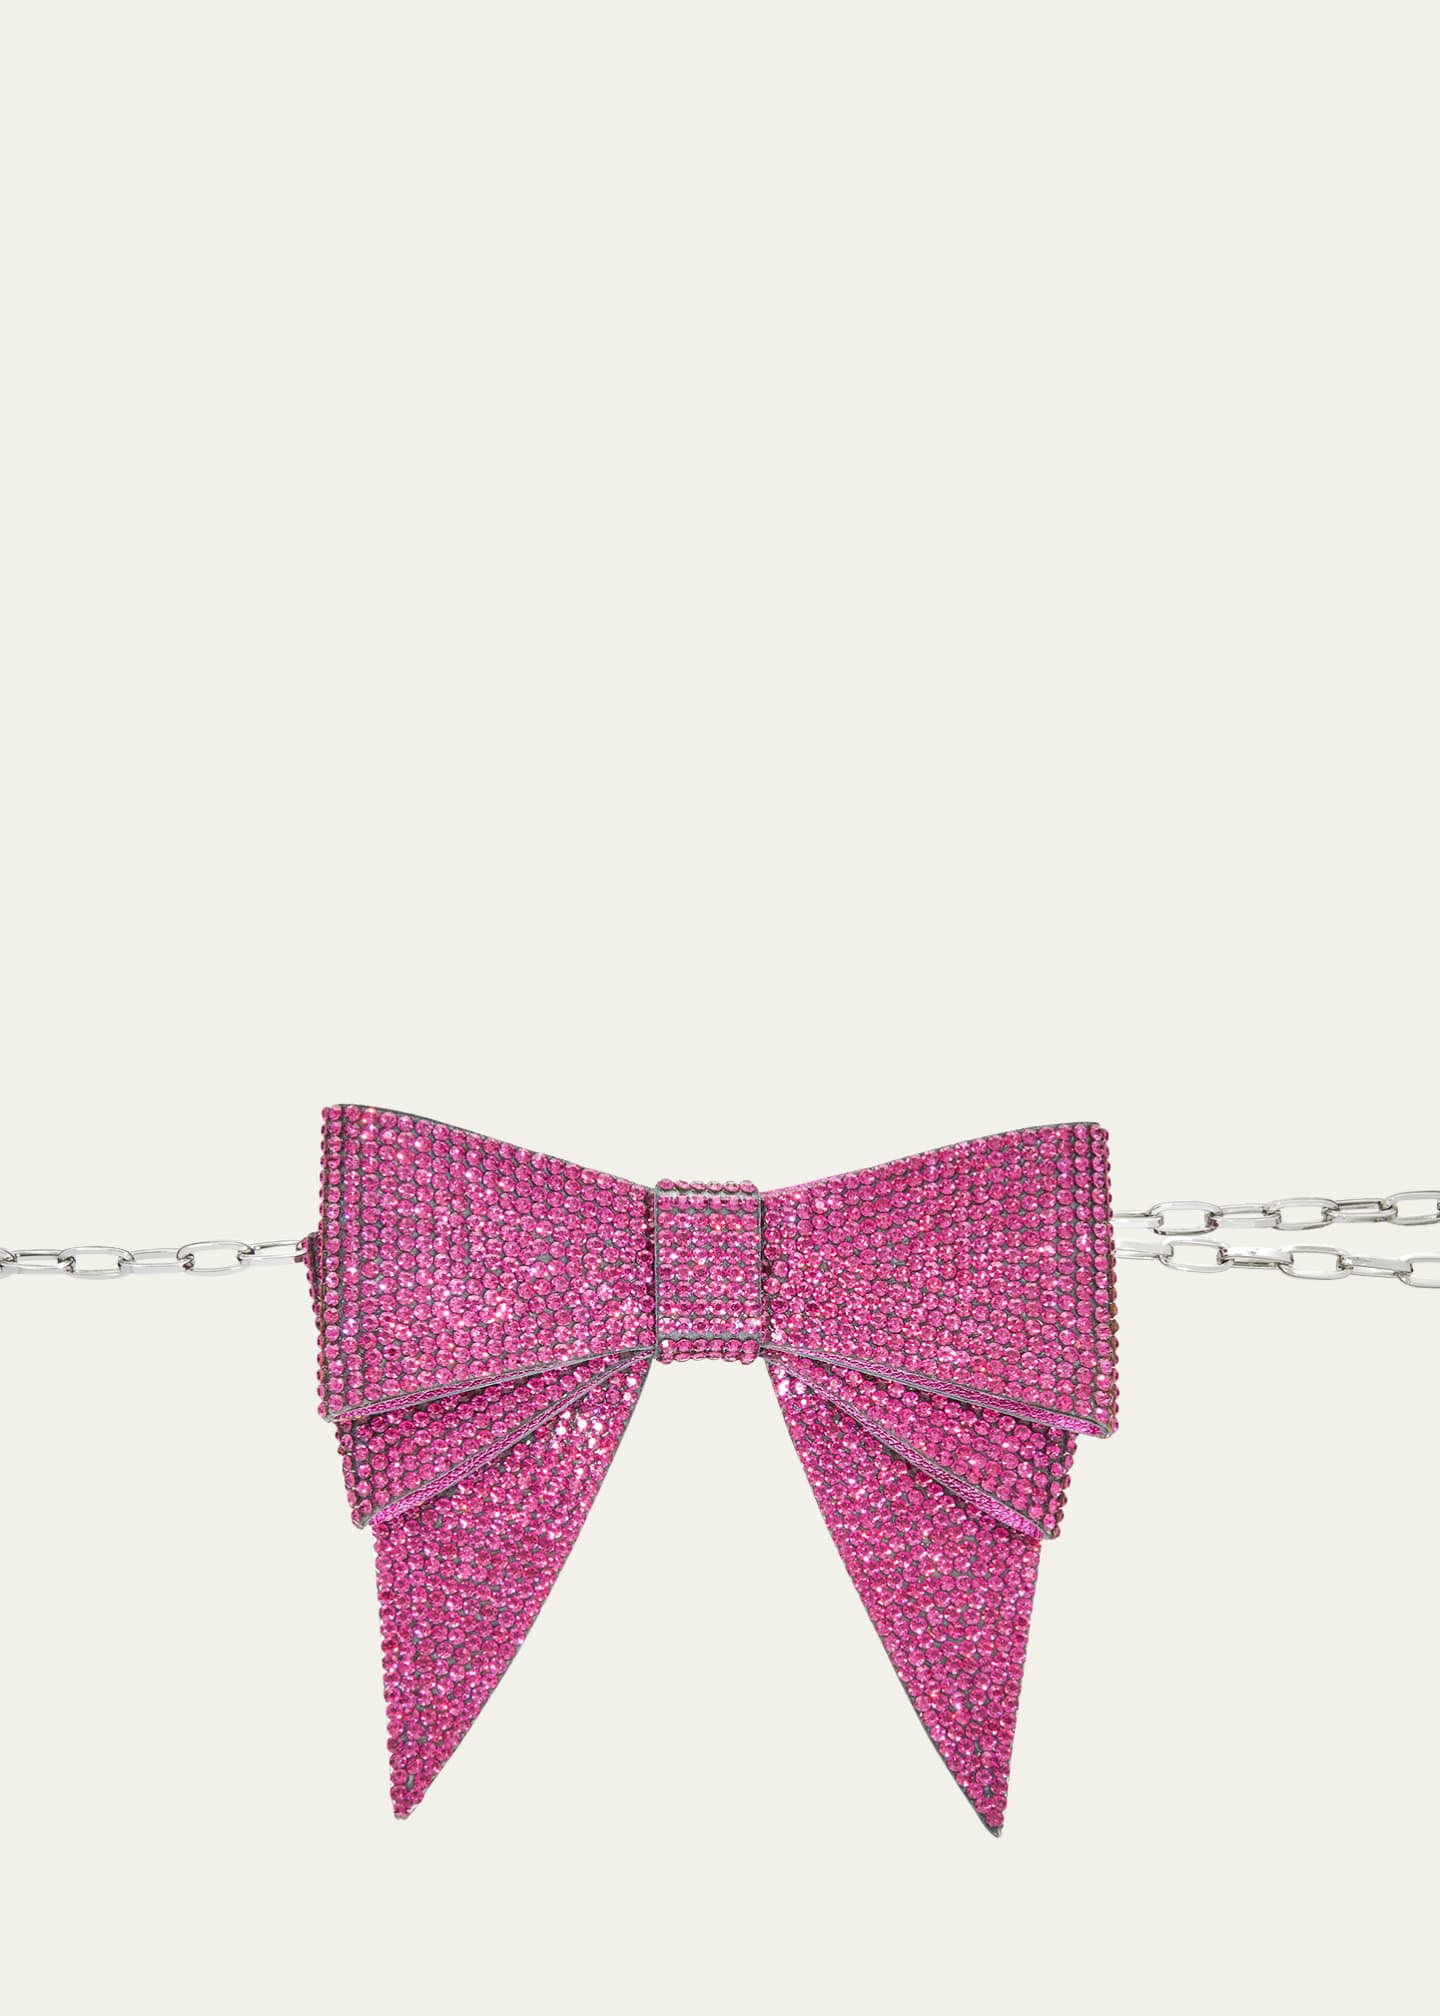 Judith Leiber Couture Crystal Bow Clutch Bag - Bergdorf Goodman